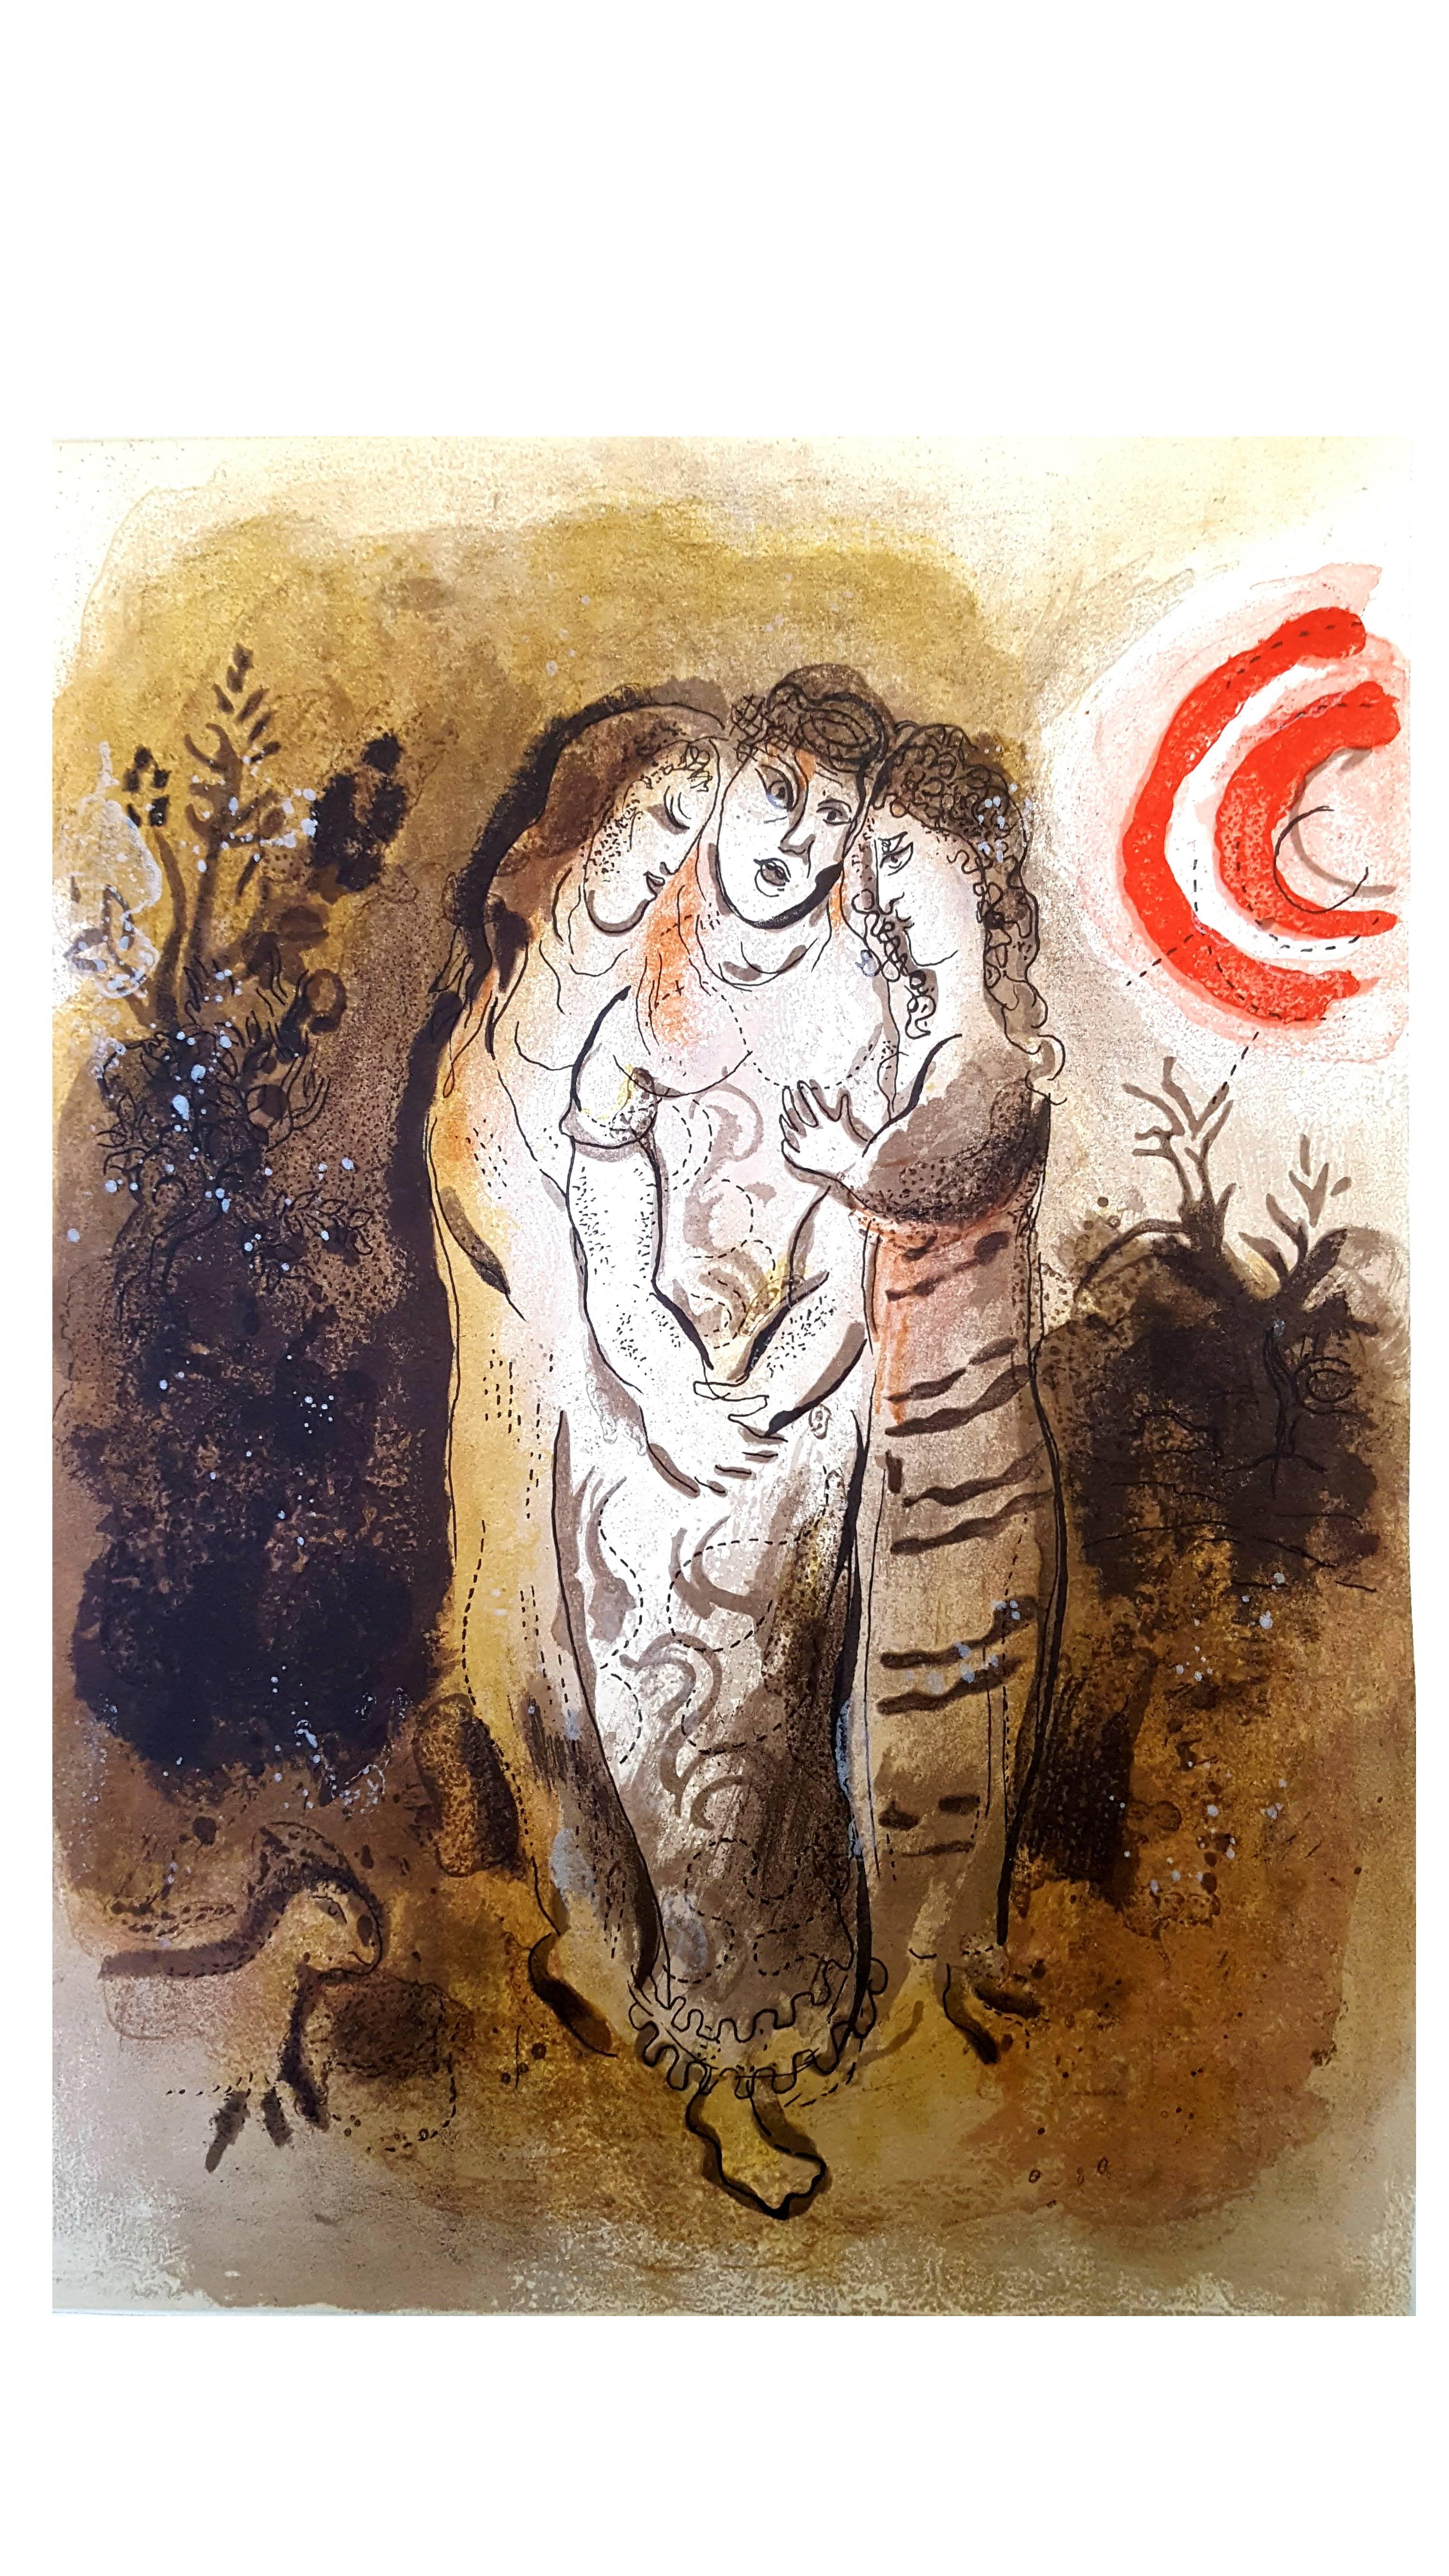 Marc Chagall - The Bible - Naomi and her daughters-in-law - Original Lithograph